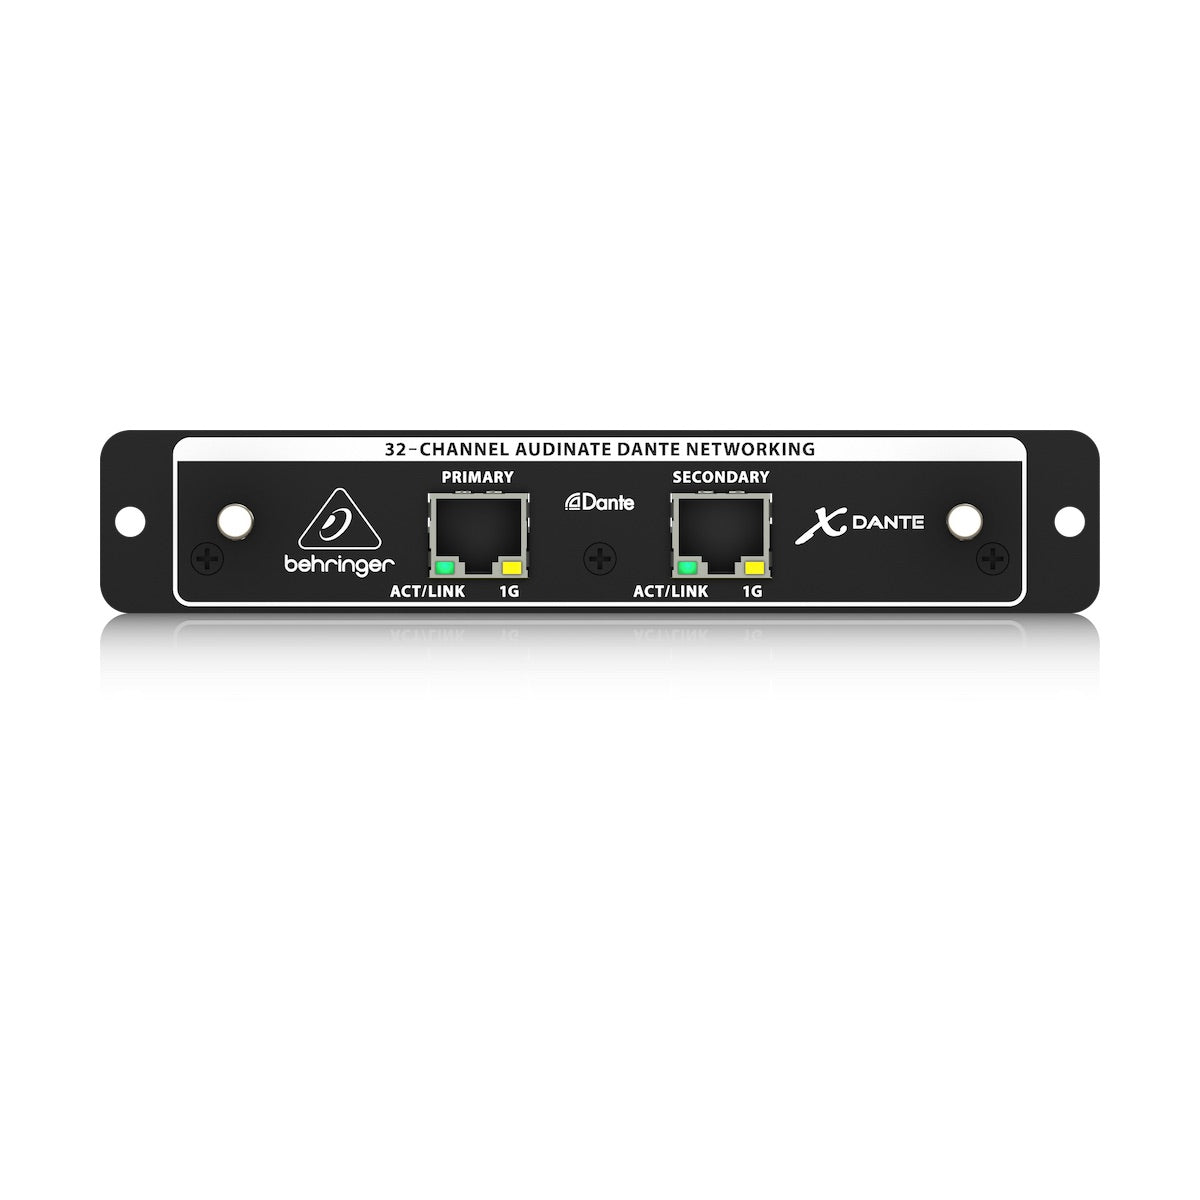 Behringer X-DANTE - High-Performance 32-Channel Audinate Dante Expansion Card for X32 front